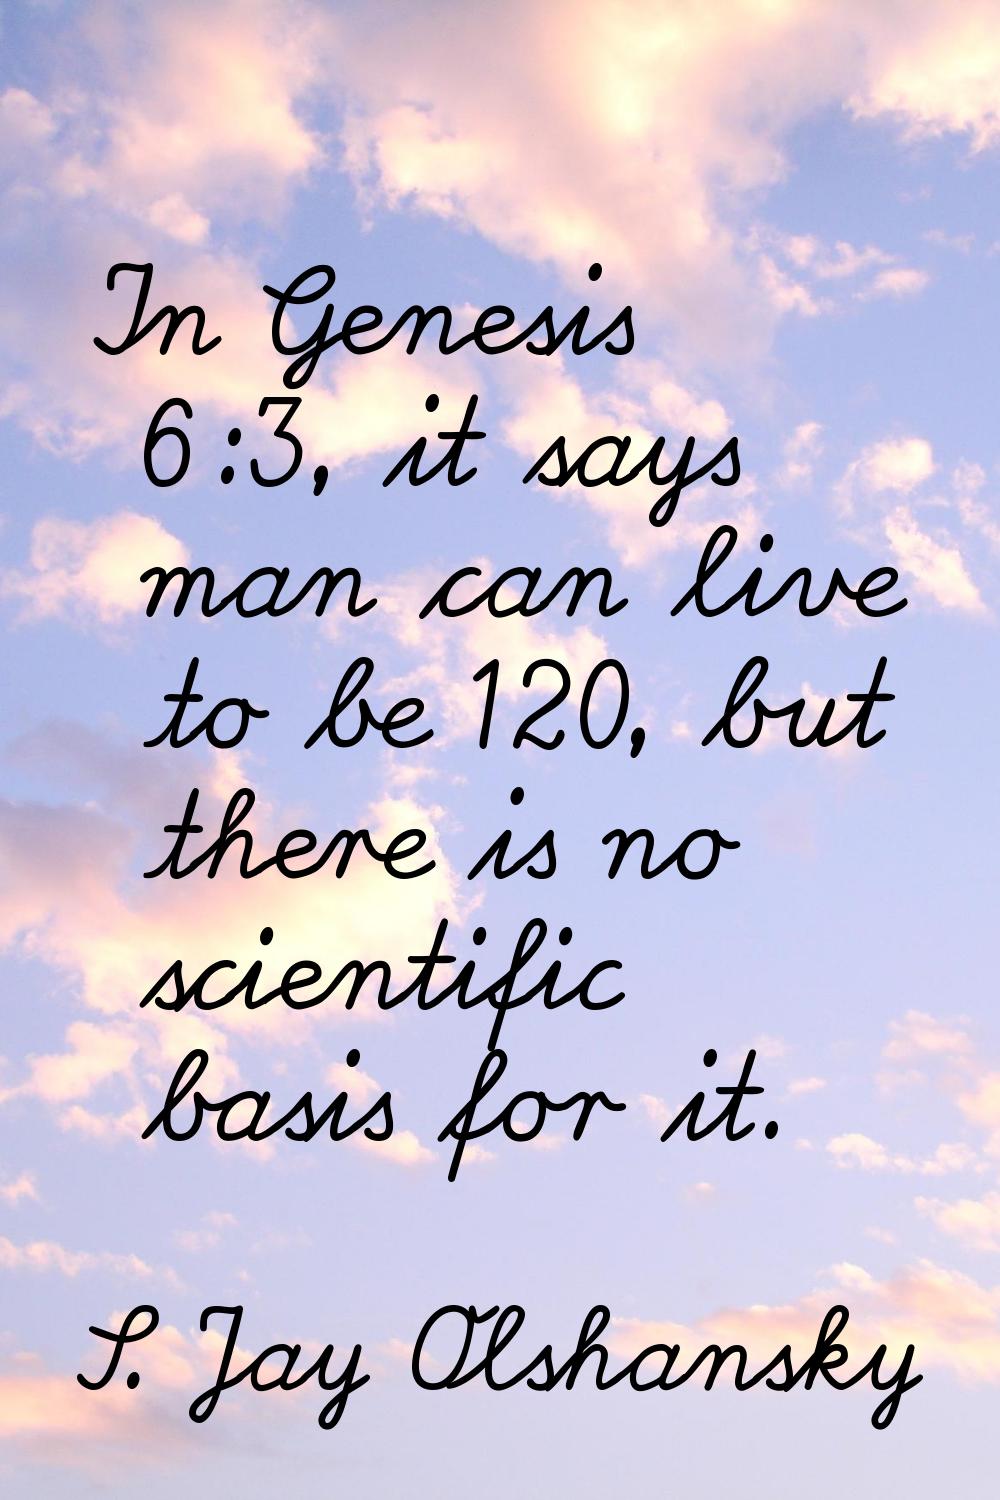 In Genesis 6:3, it says man can live to be 120, but there is no scientific basis for it.